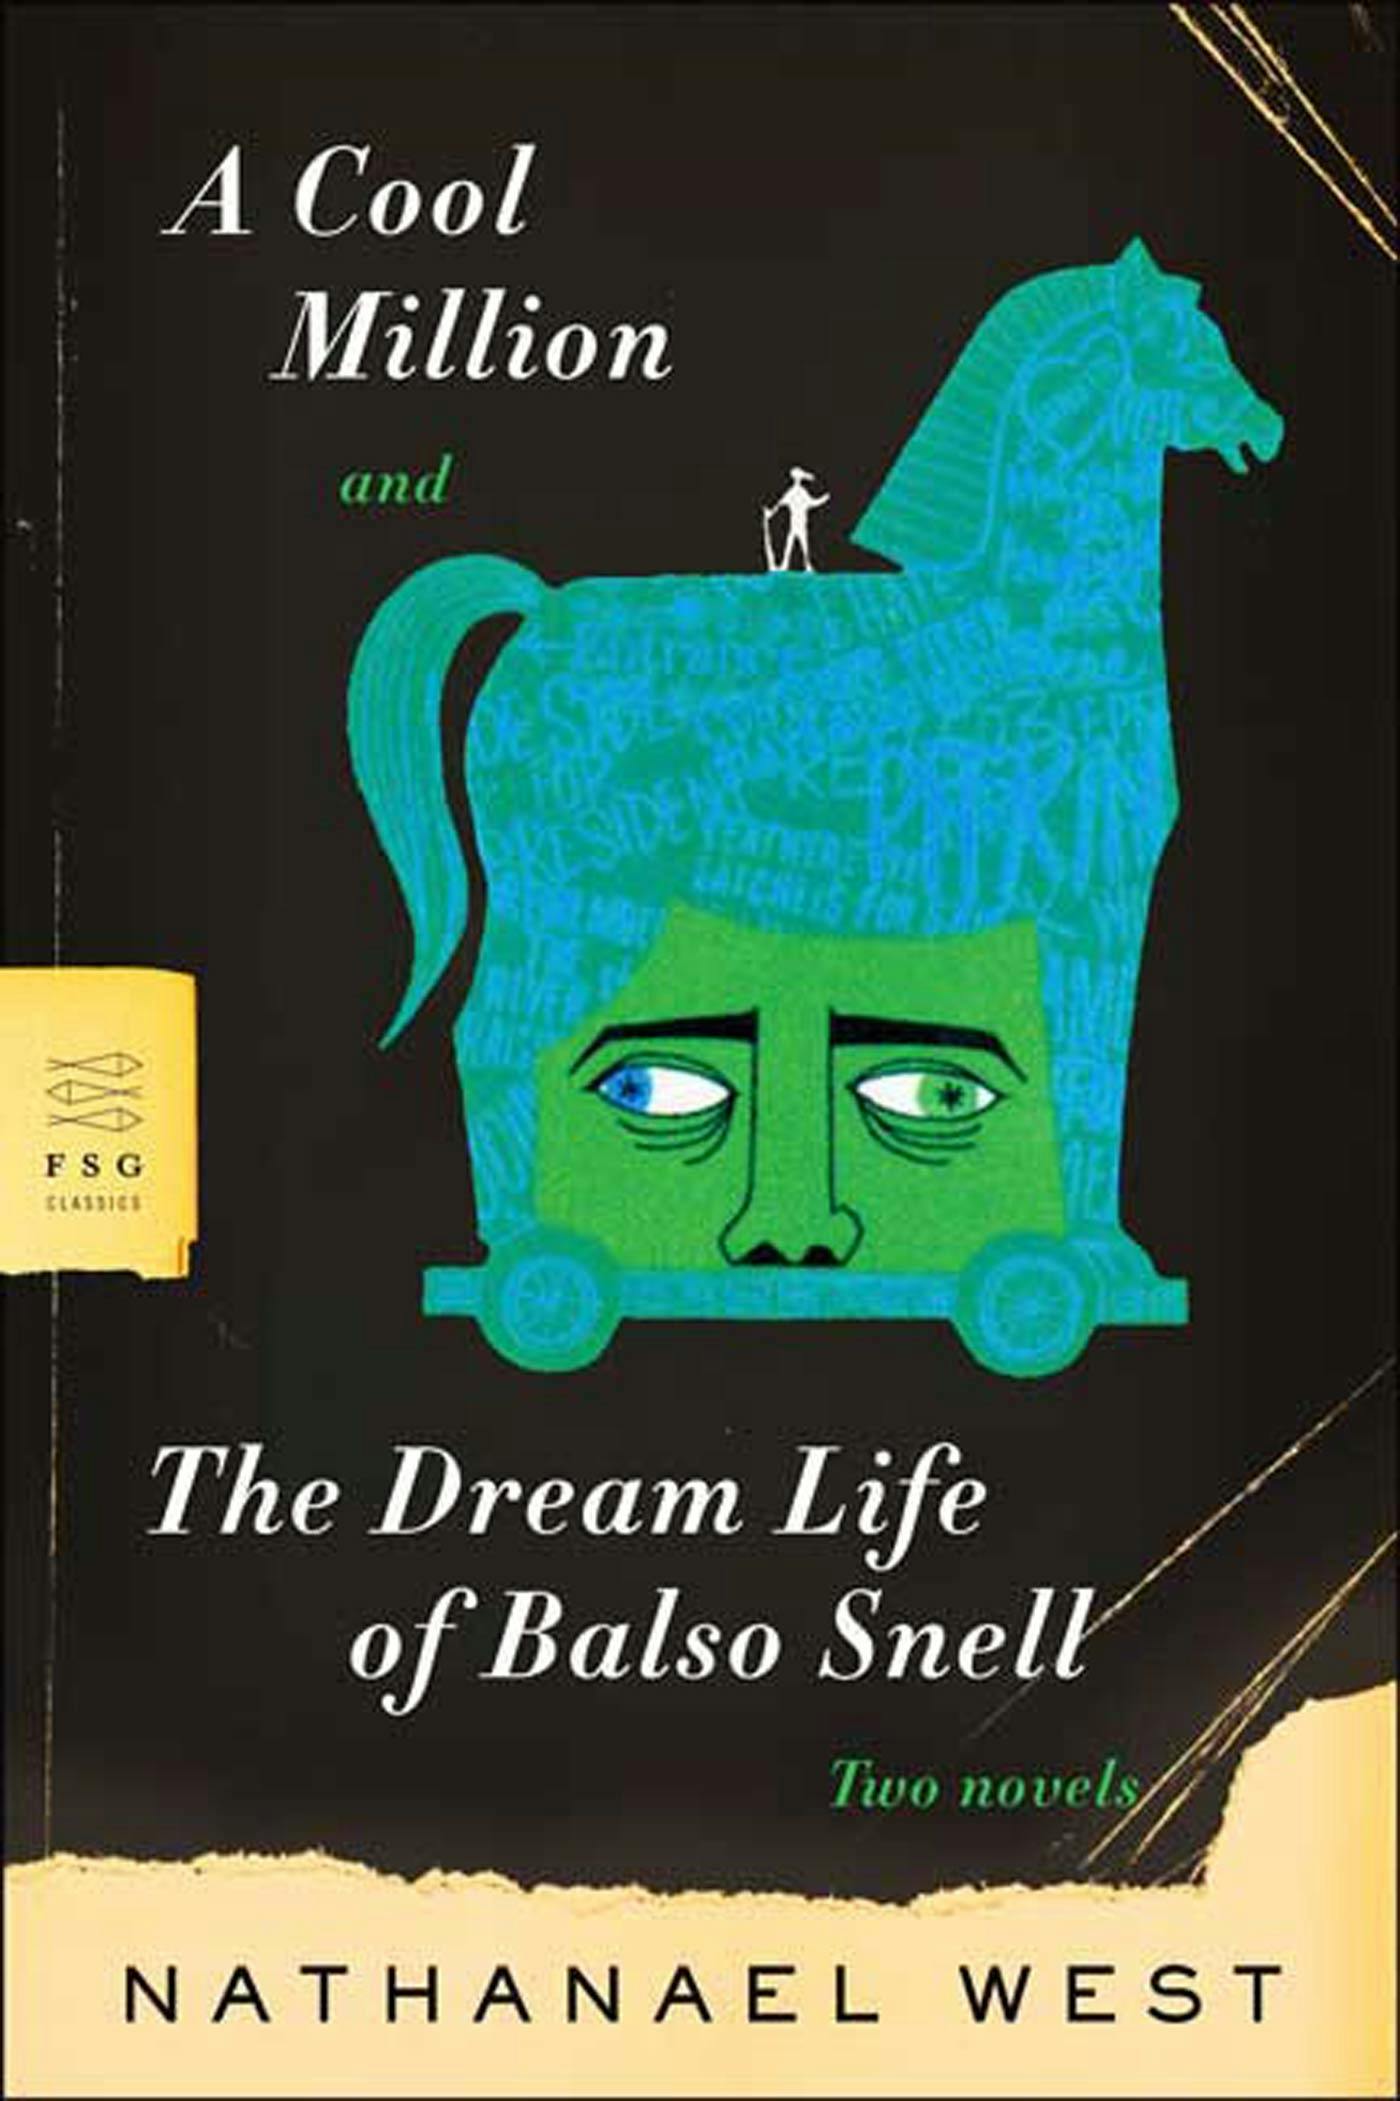 Cool Million and The Dream Life of Balso Snell